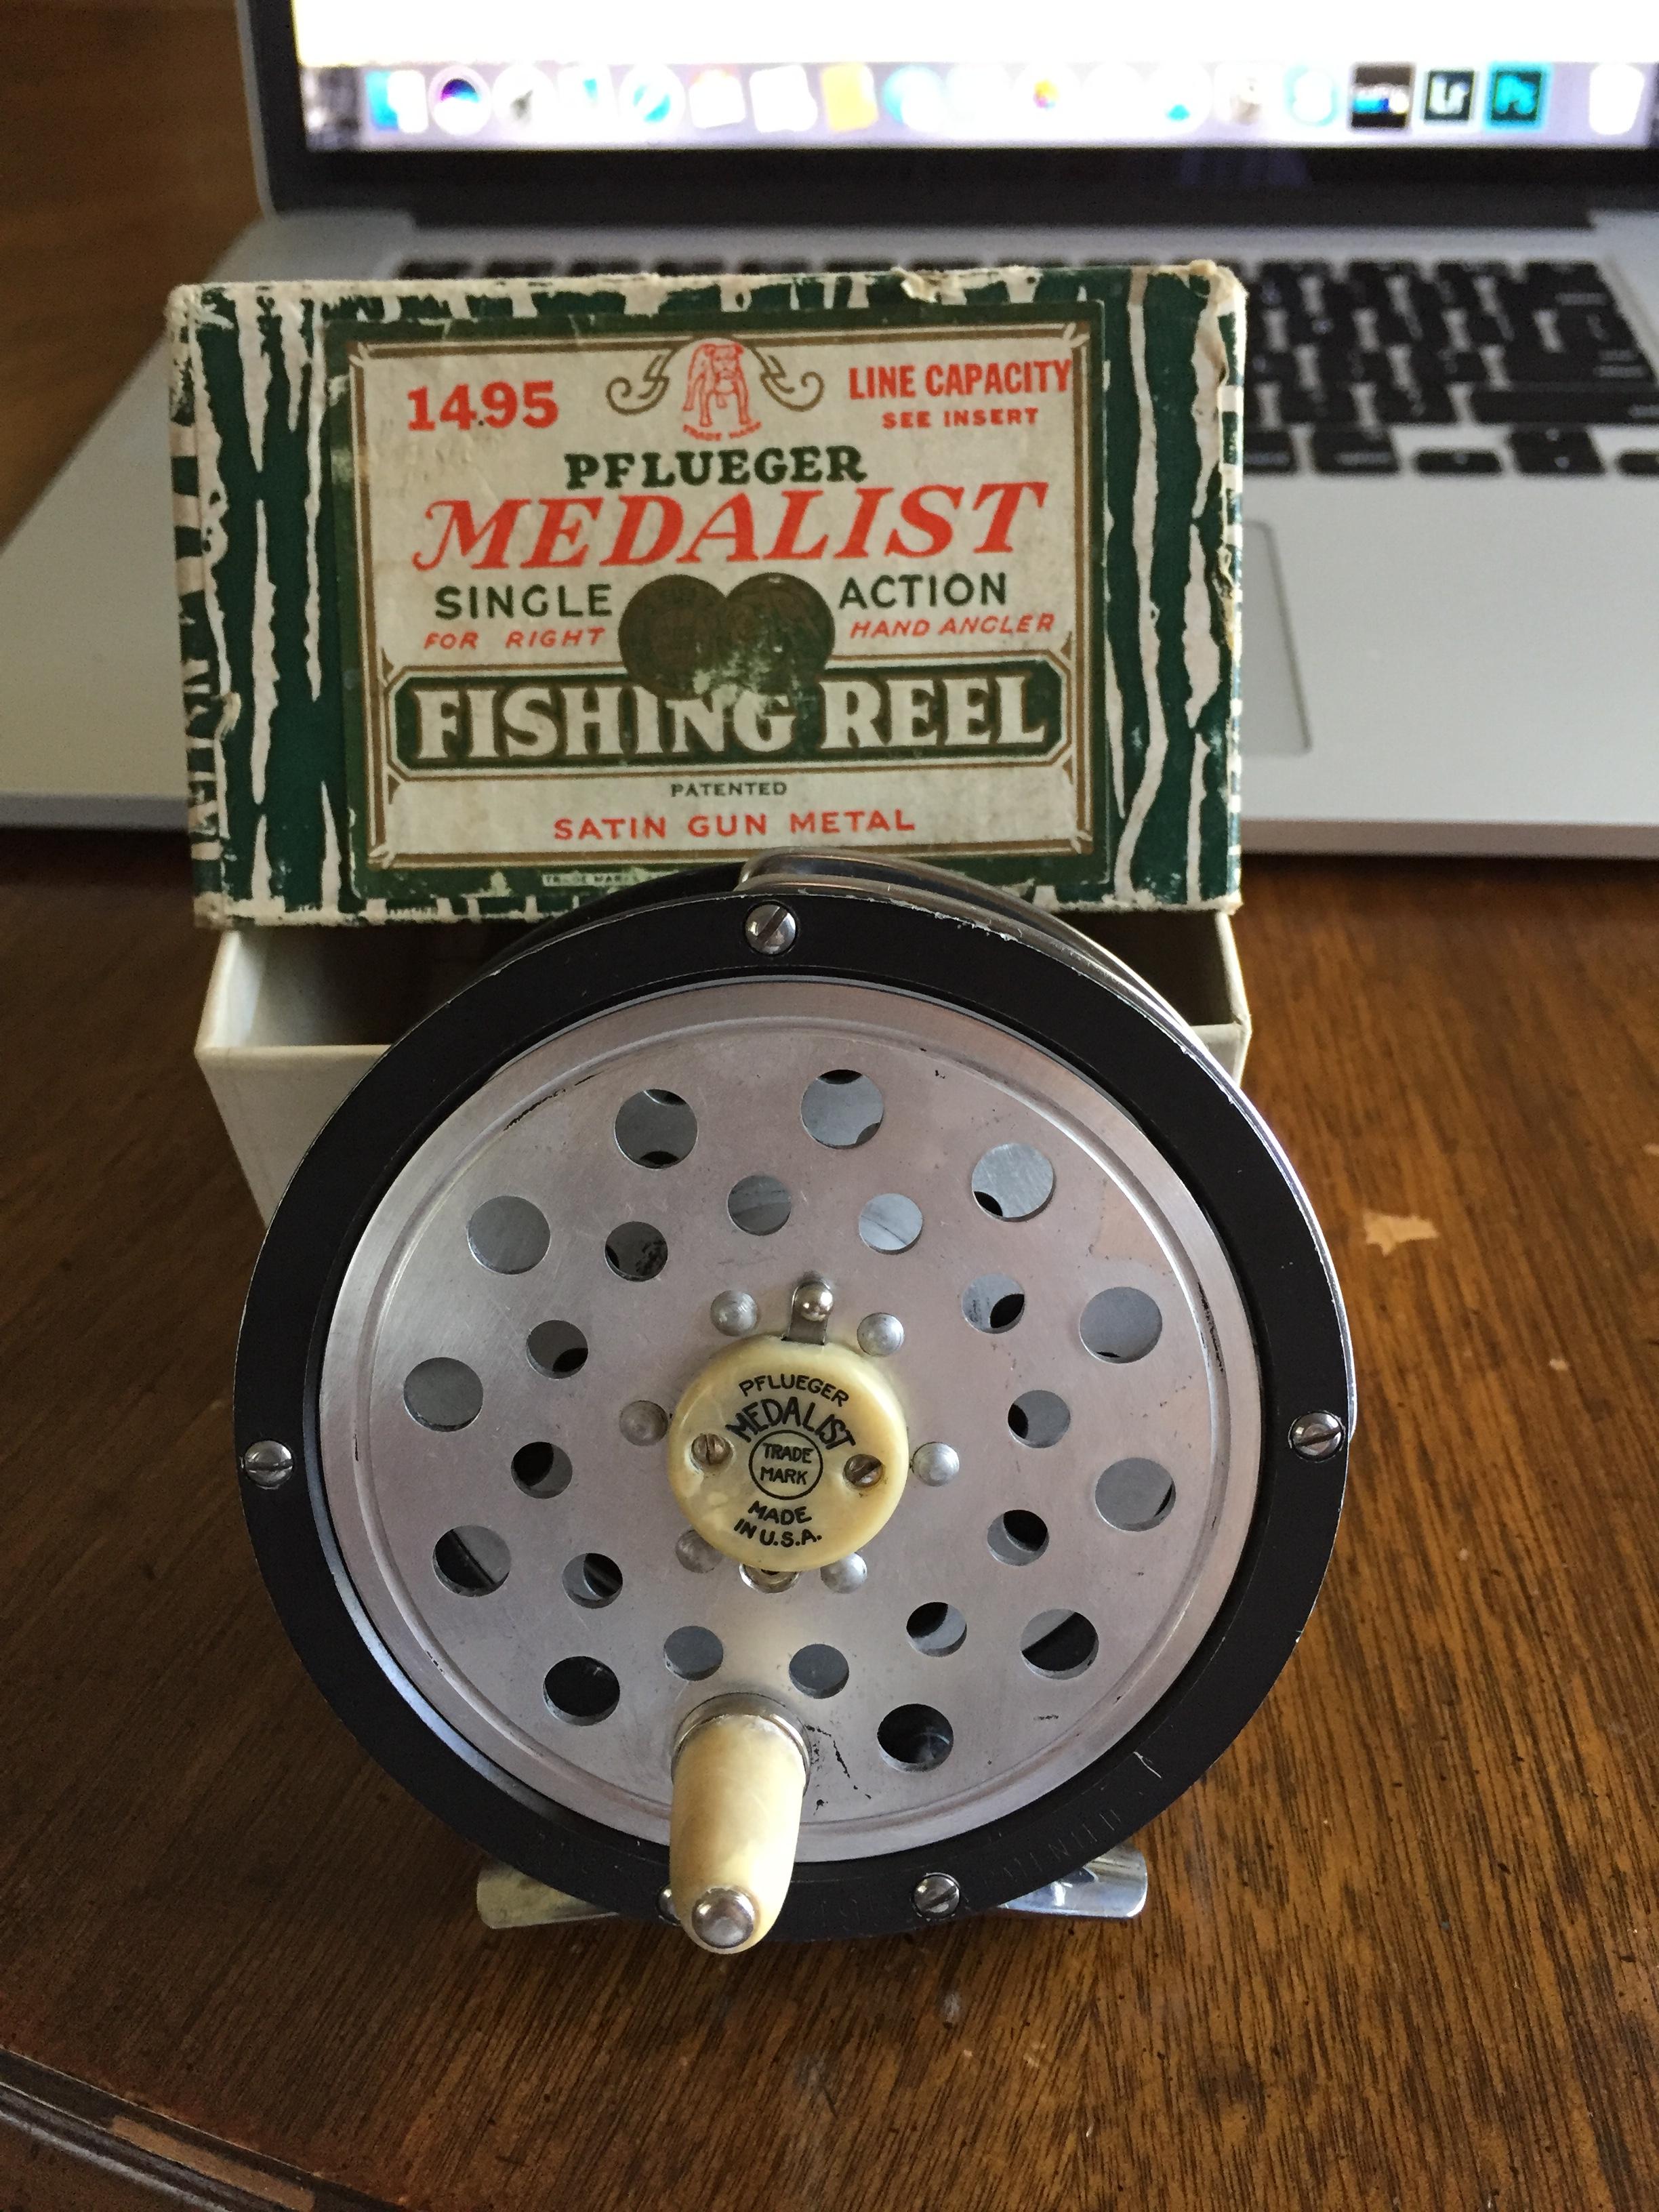 Pflueger Medalist 1495 single action parts, Classic Fly Reels